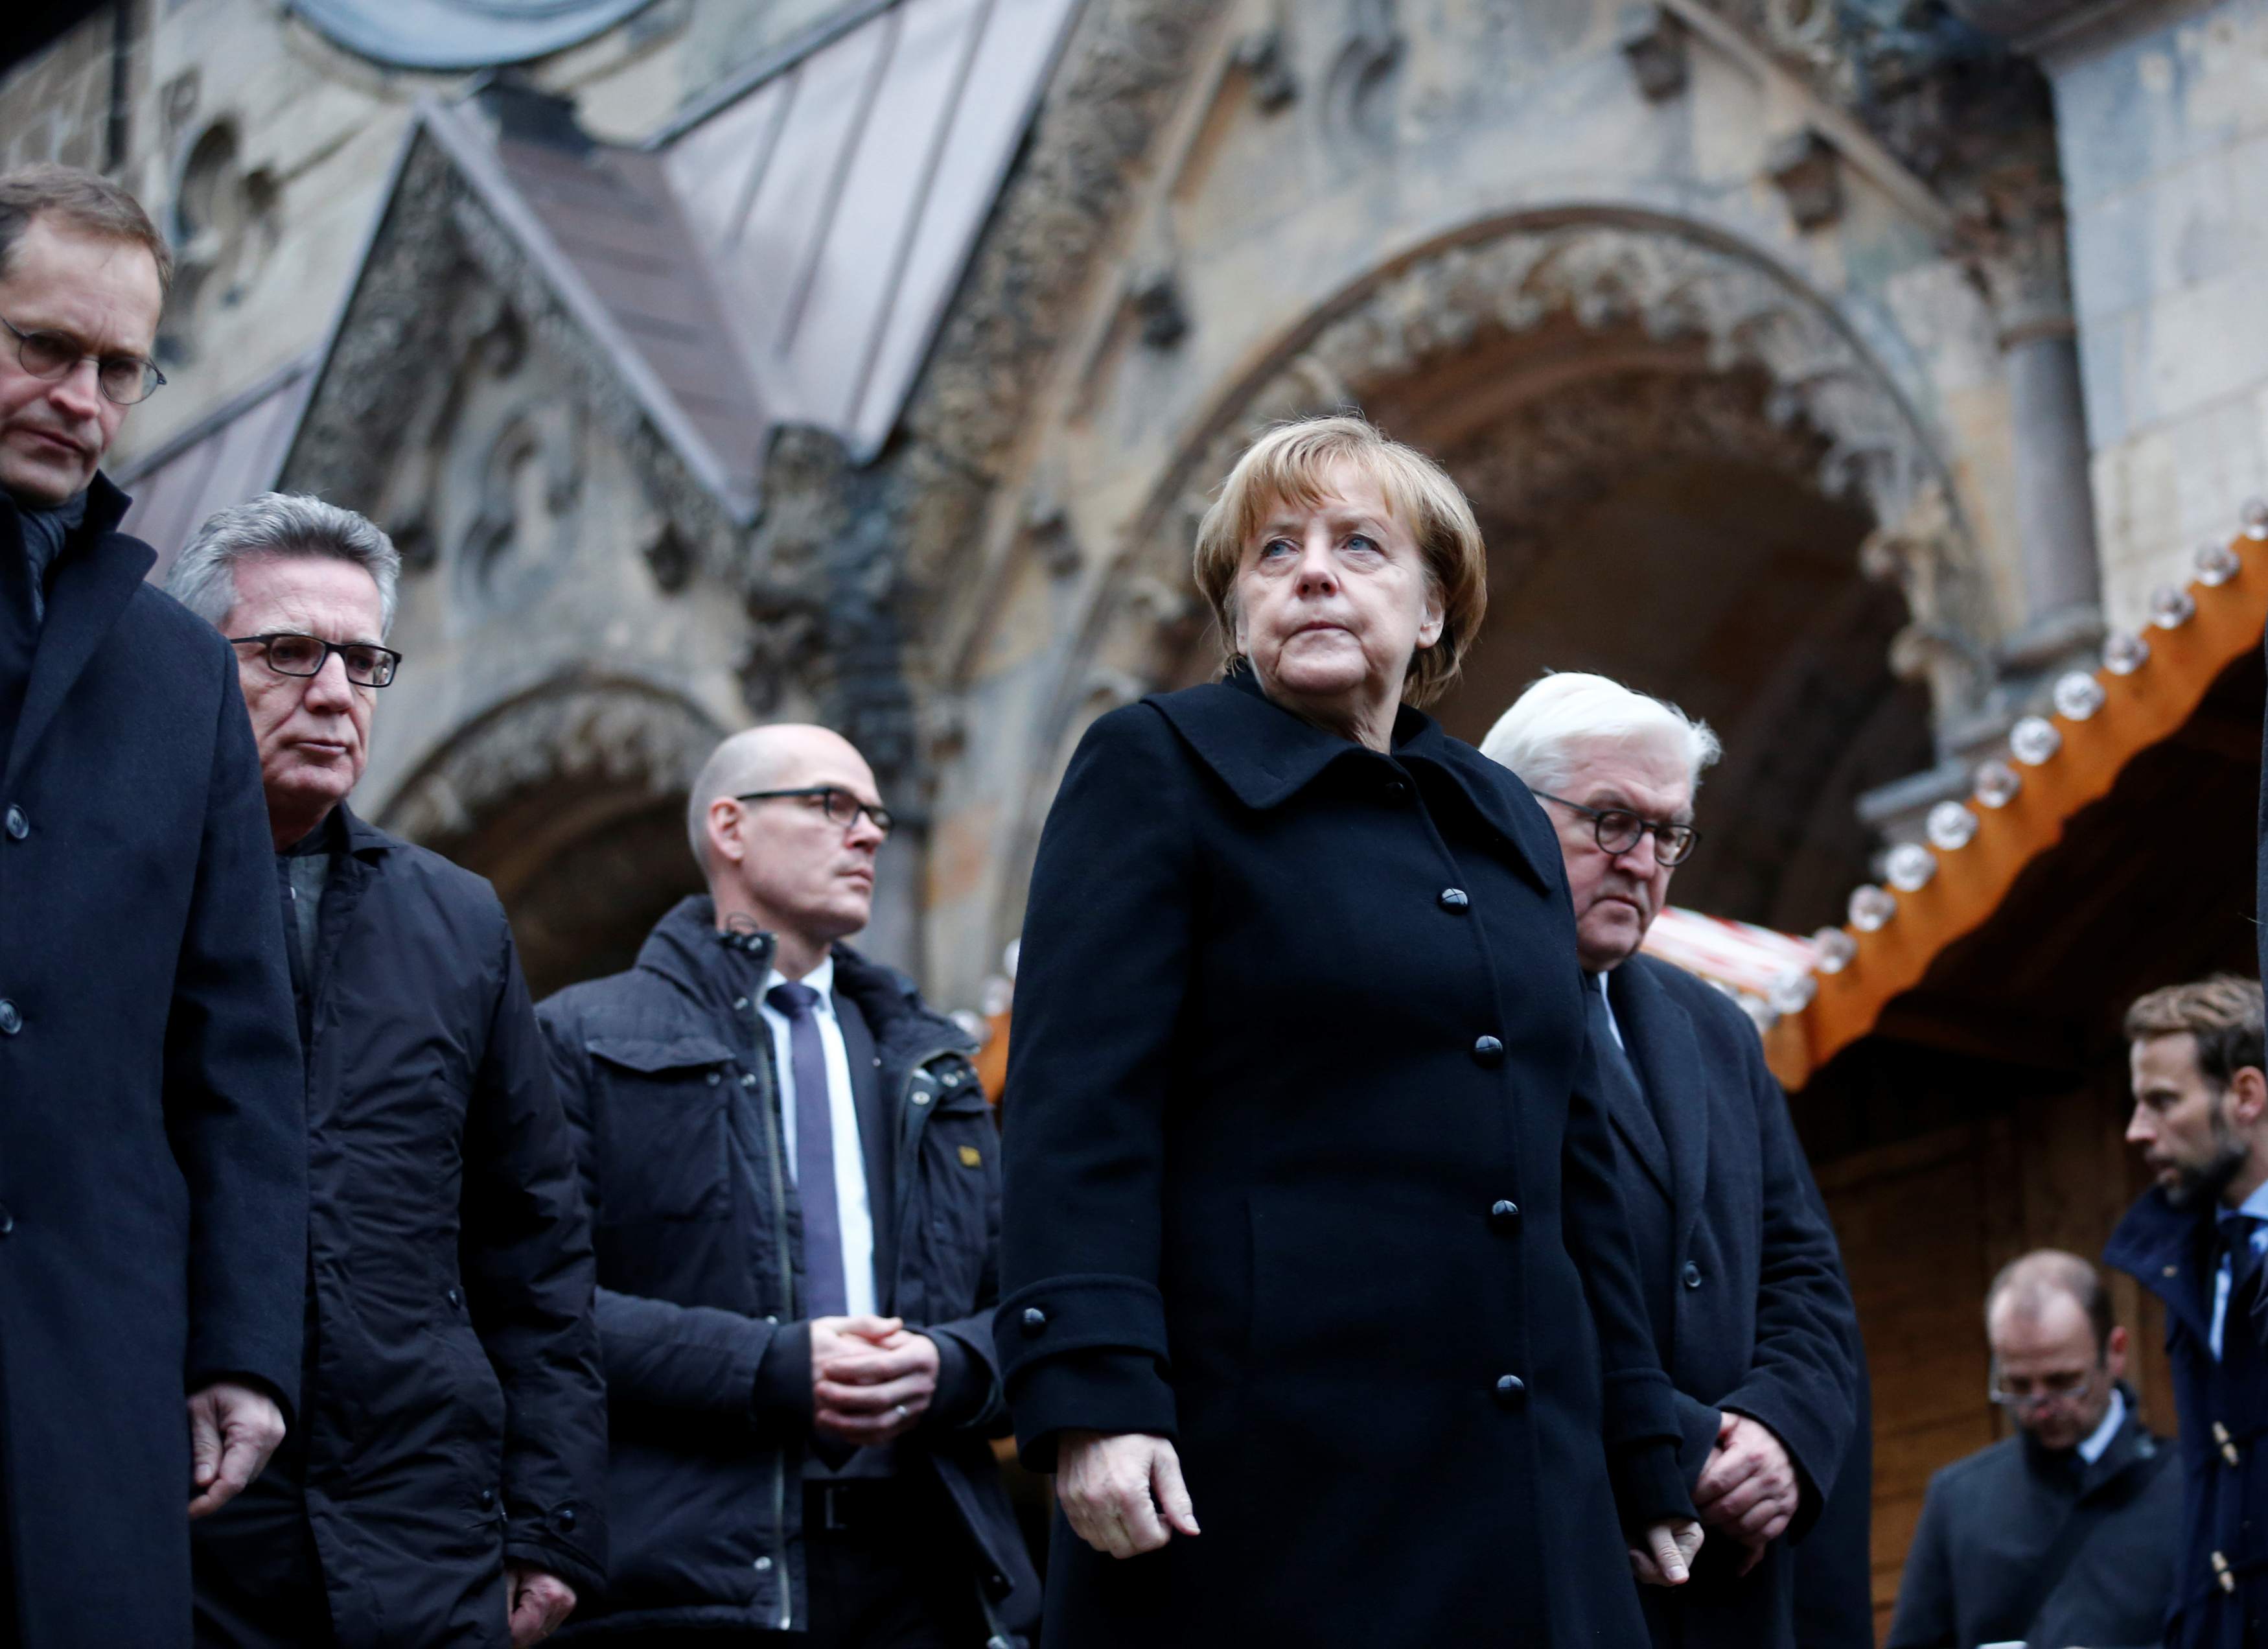 Angela Merkel visits the site of the Christmas market attack.